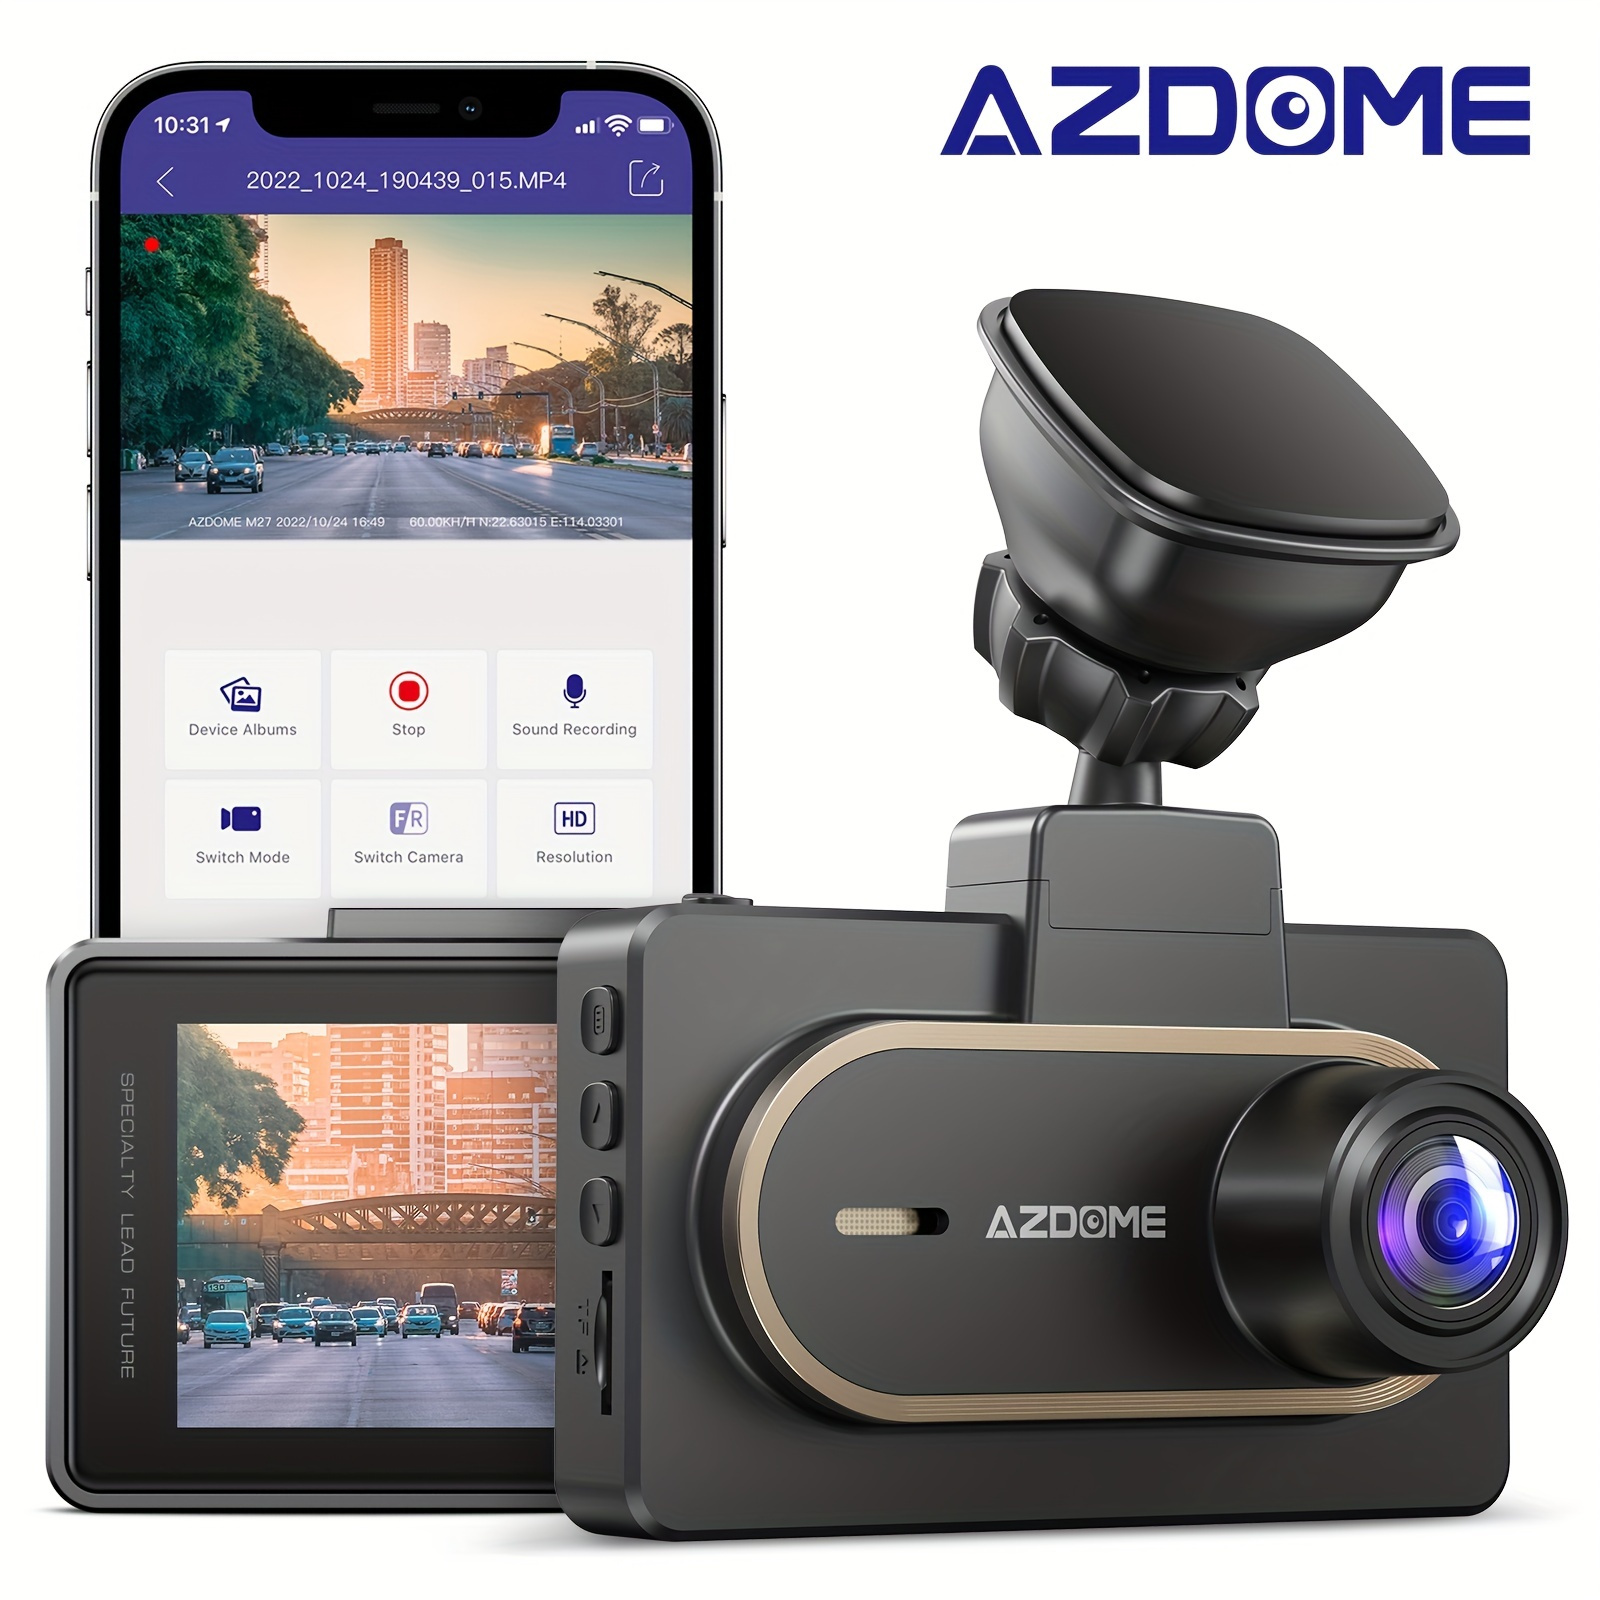  Dash Cam, 2560x1440P QHD, Front and Rear Dash Cam with